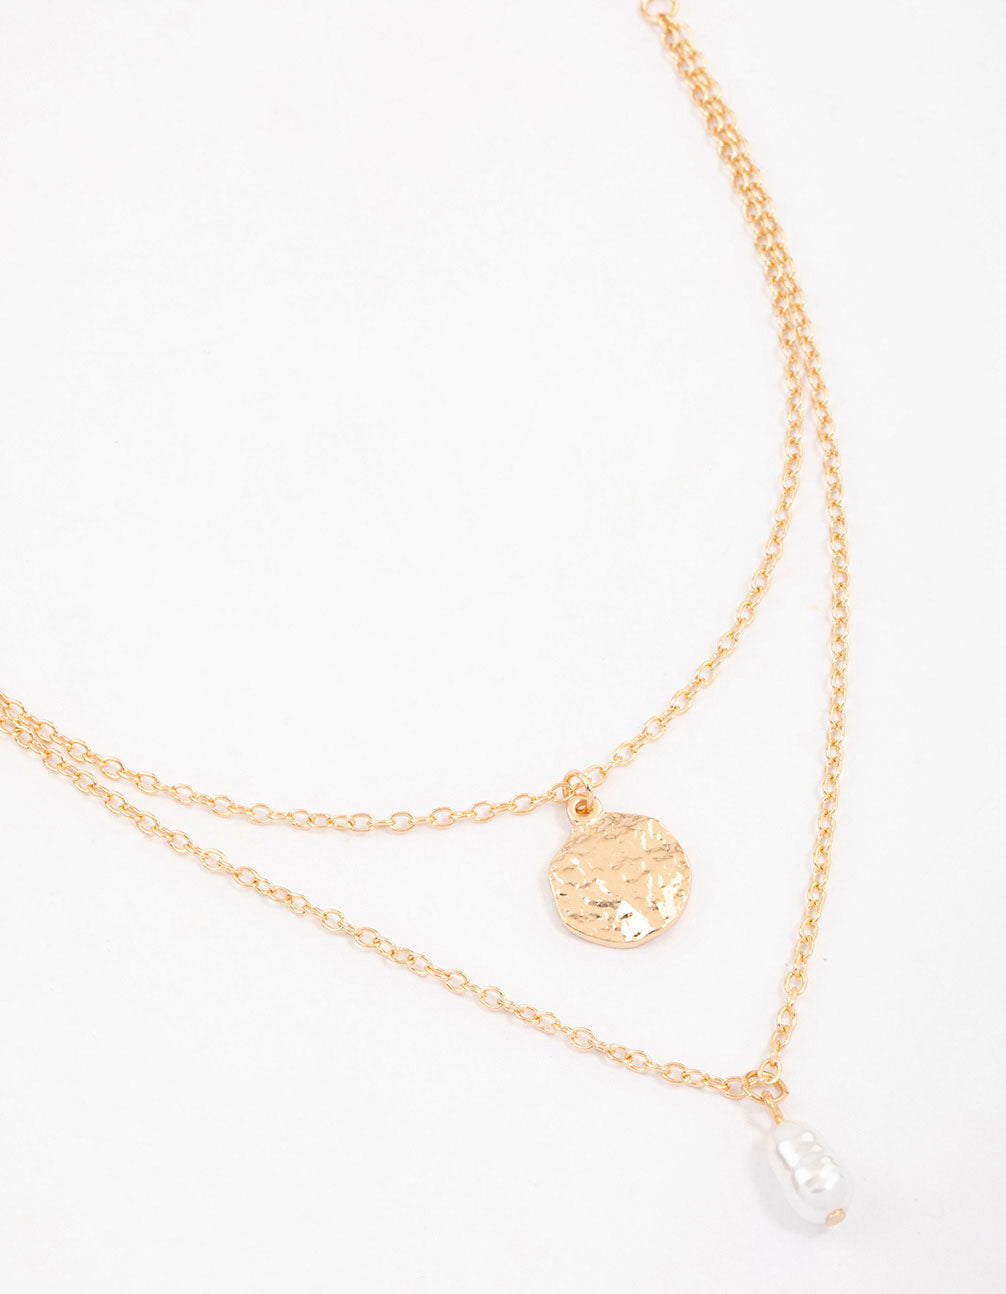 How to Stack Real Gold Necklace | Auric Jewellery